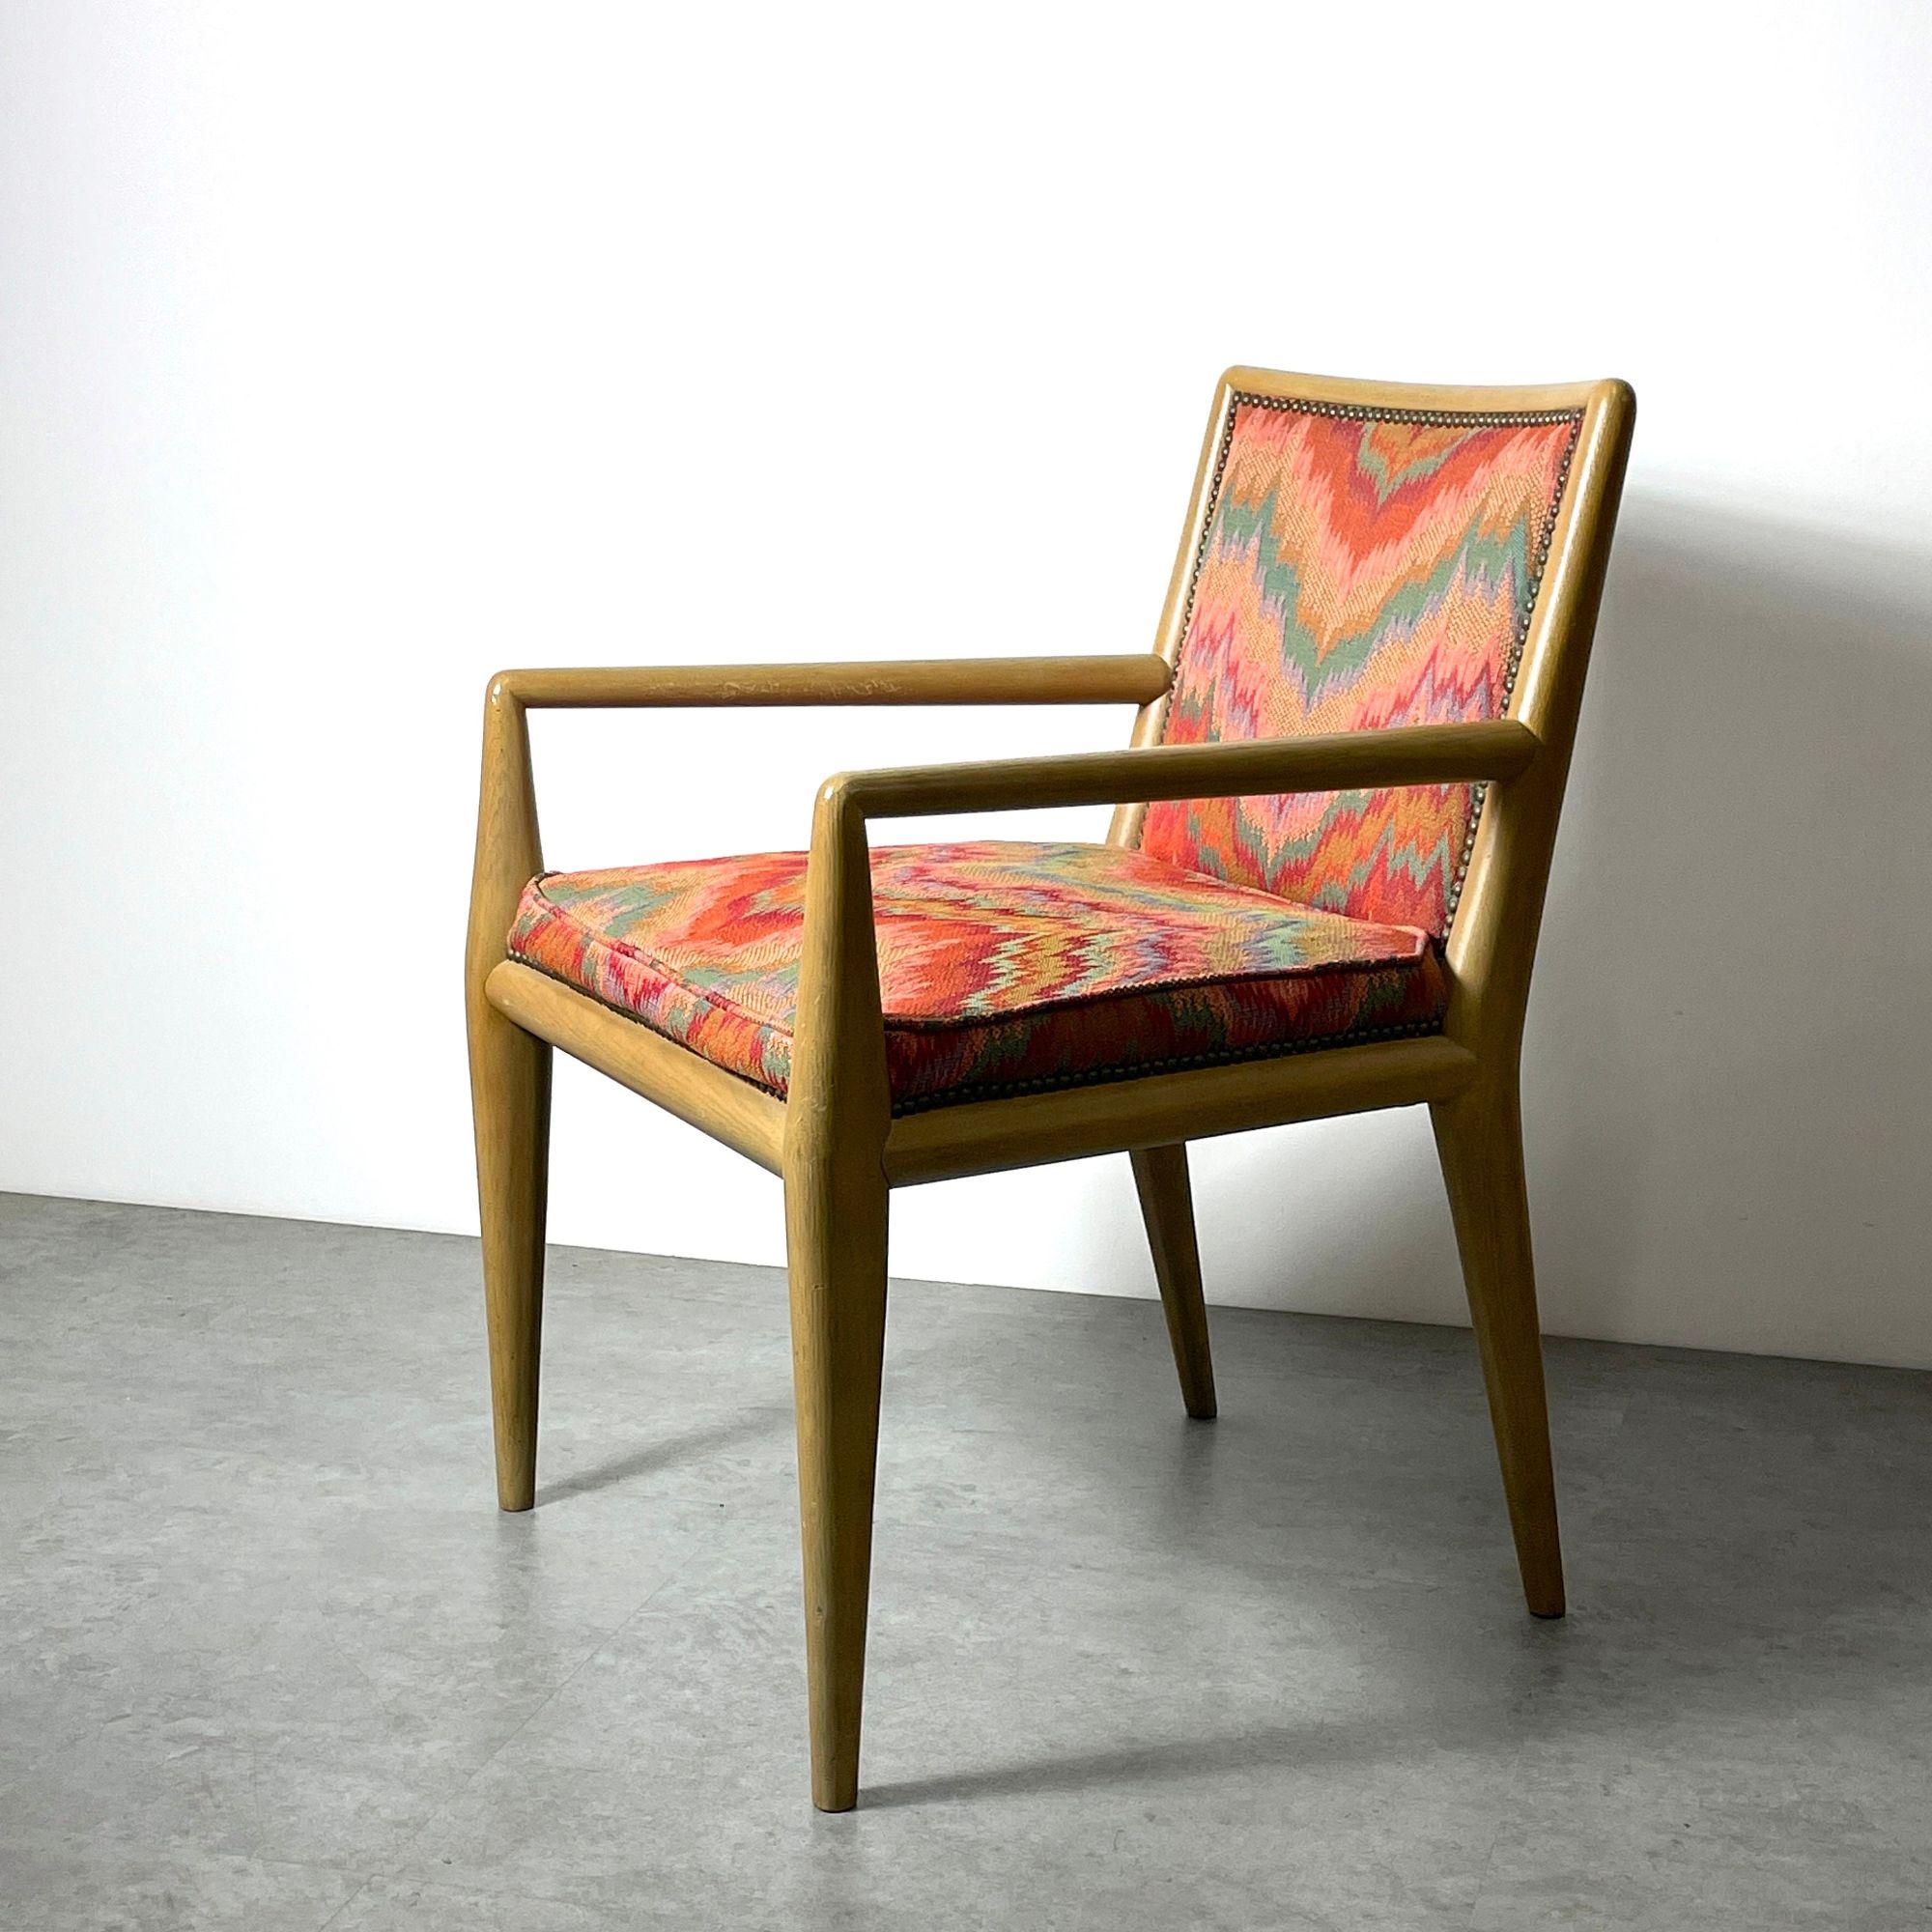 Robsjohn Gibbings for Widdicomb Armchair 

Open armchair designed by Terence Harold Robsjohn-Gibbings for Widdicomb circa 1950s
Sculpted frame in bleached walnut
Multi color flame stitch vintage upholstery with brass nail head accents

Additional